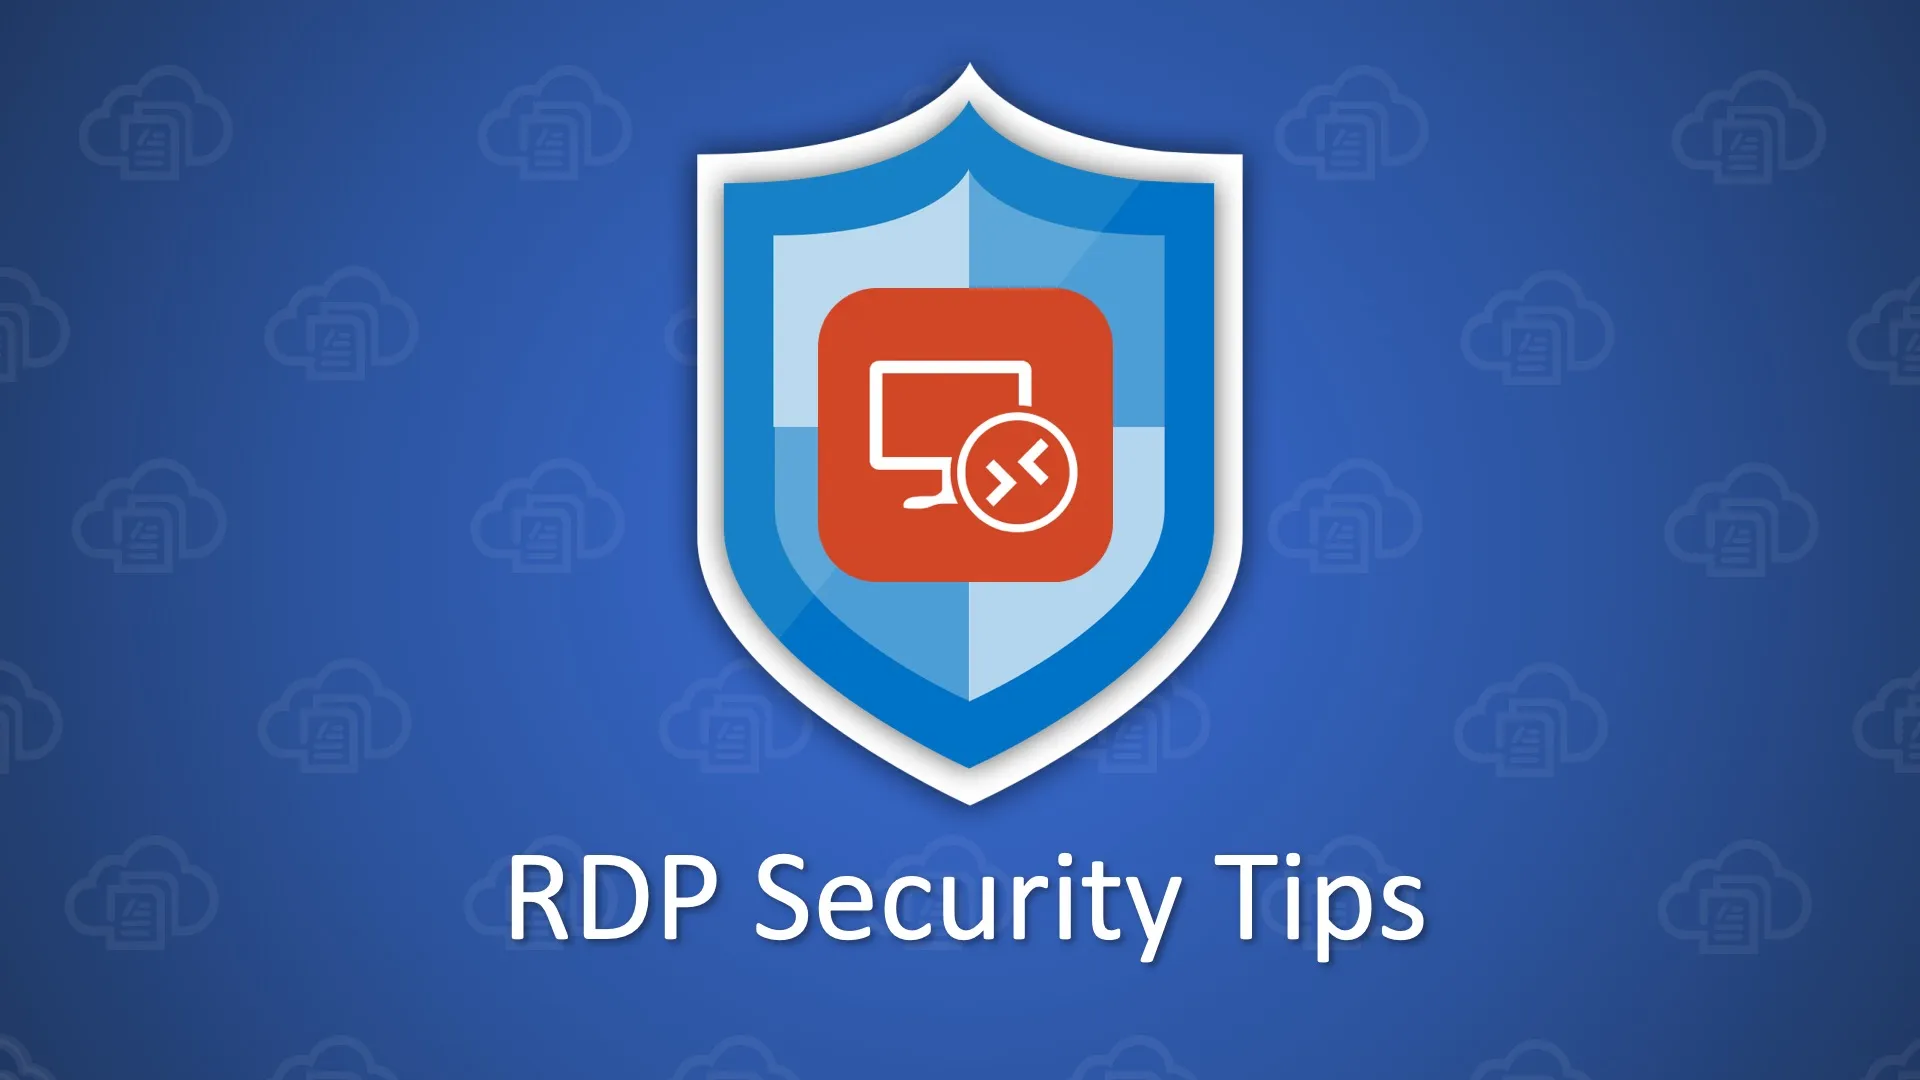 Setting Up a Secure RDP Connection